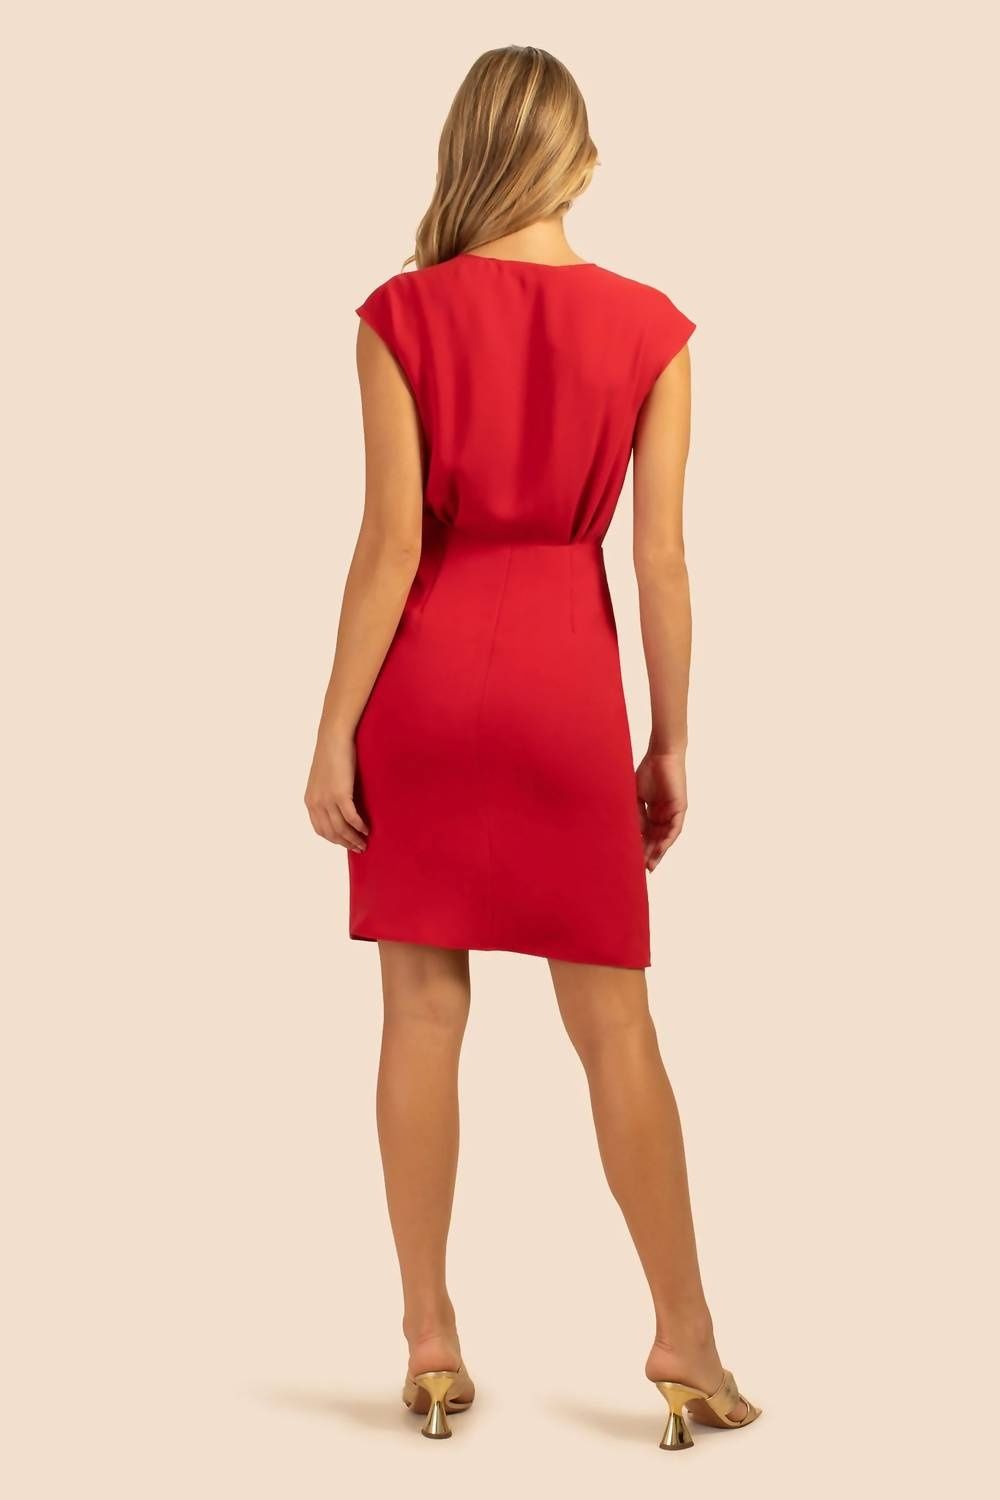 Style 1-1938311397-2168 Trina Turk Size 8 Cap Sleeve Satin Red Cocktail Dress on Queenly